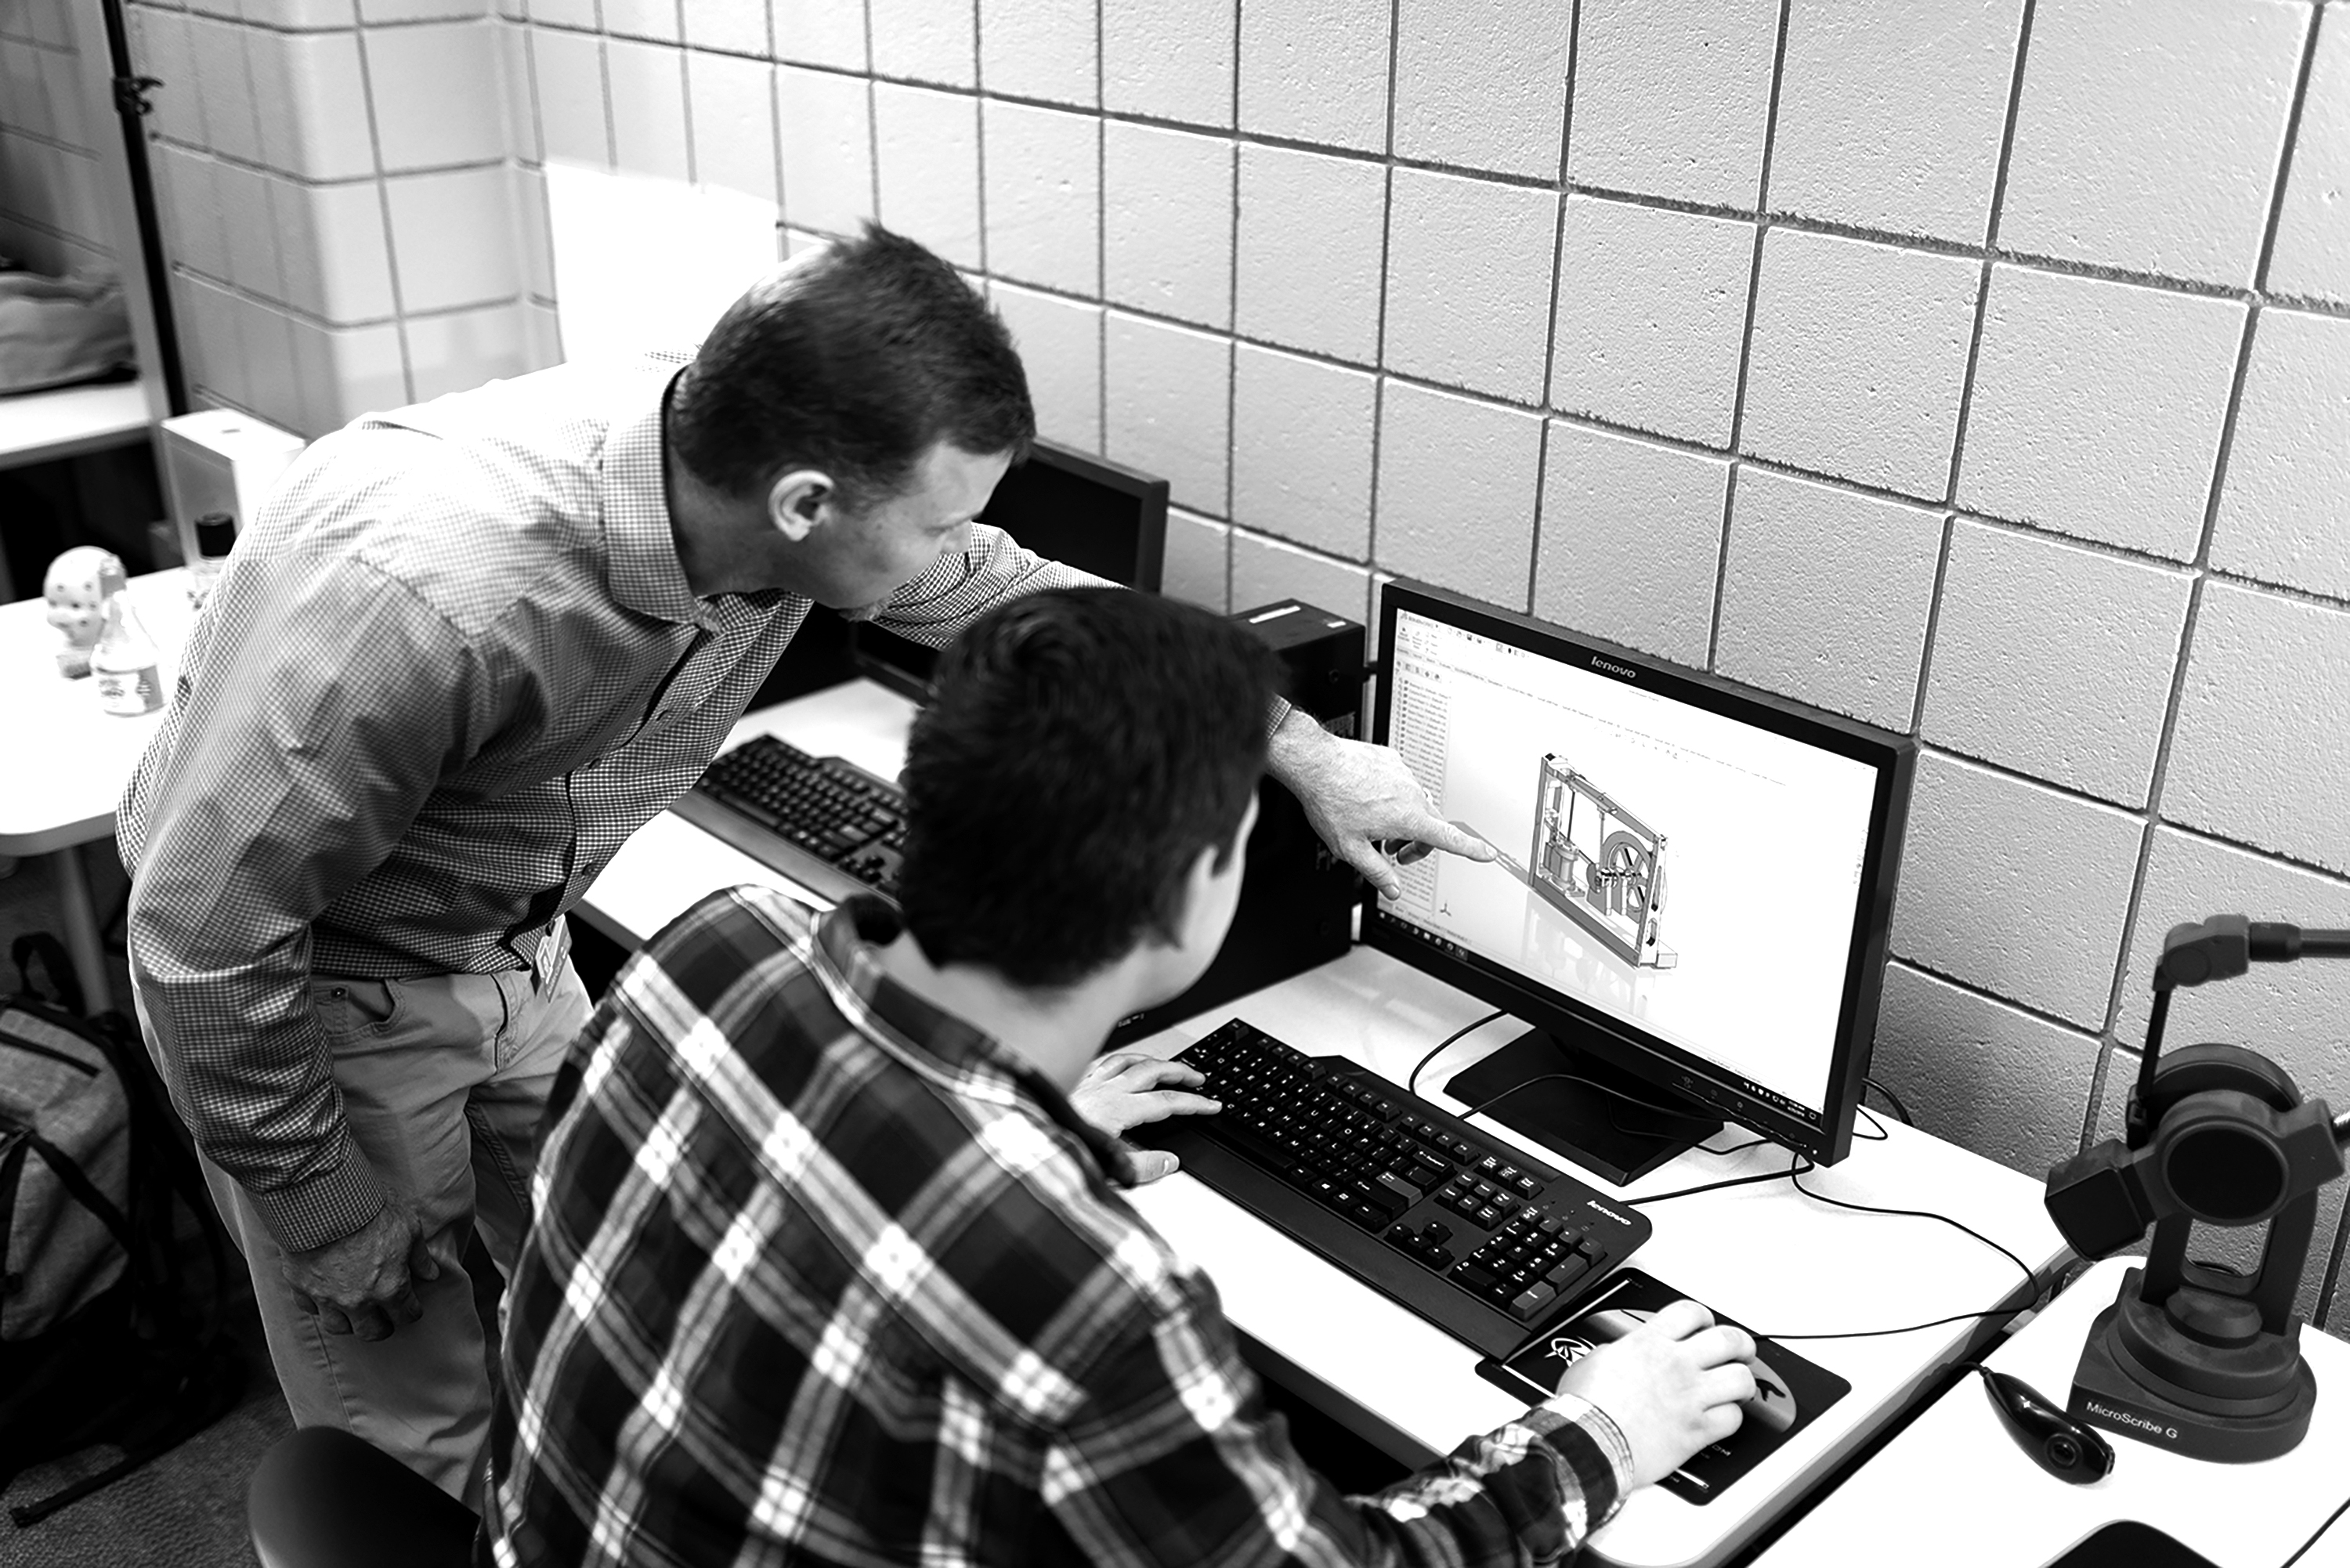 GRCC Professor assisting a student with a CAD drawing on the computer